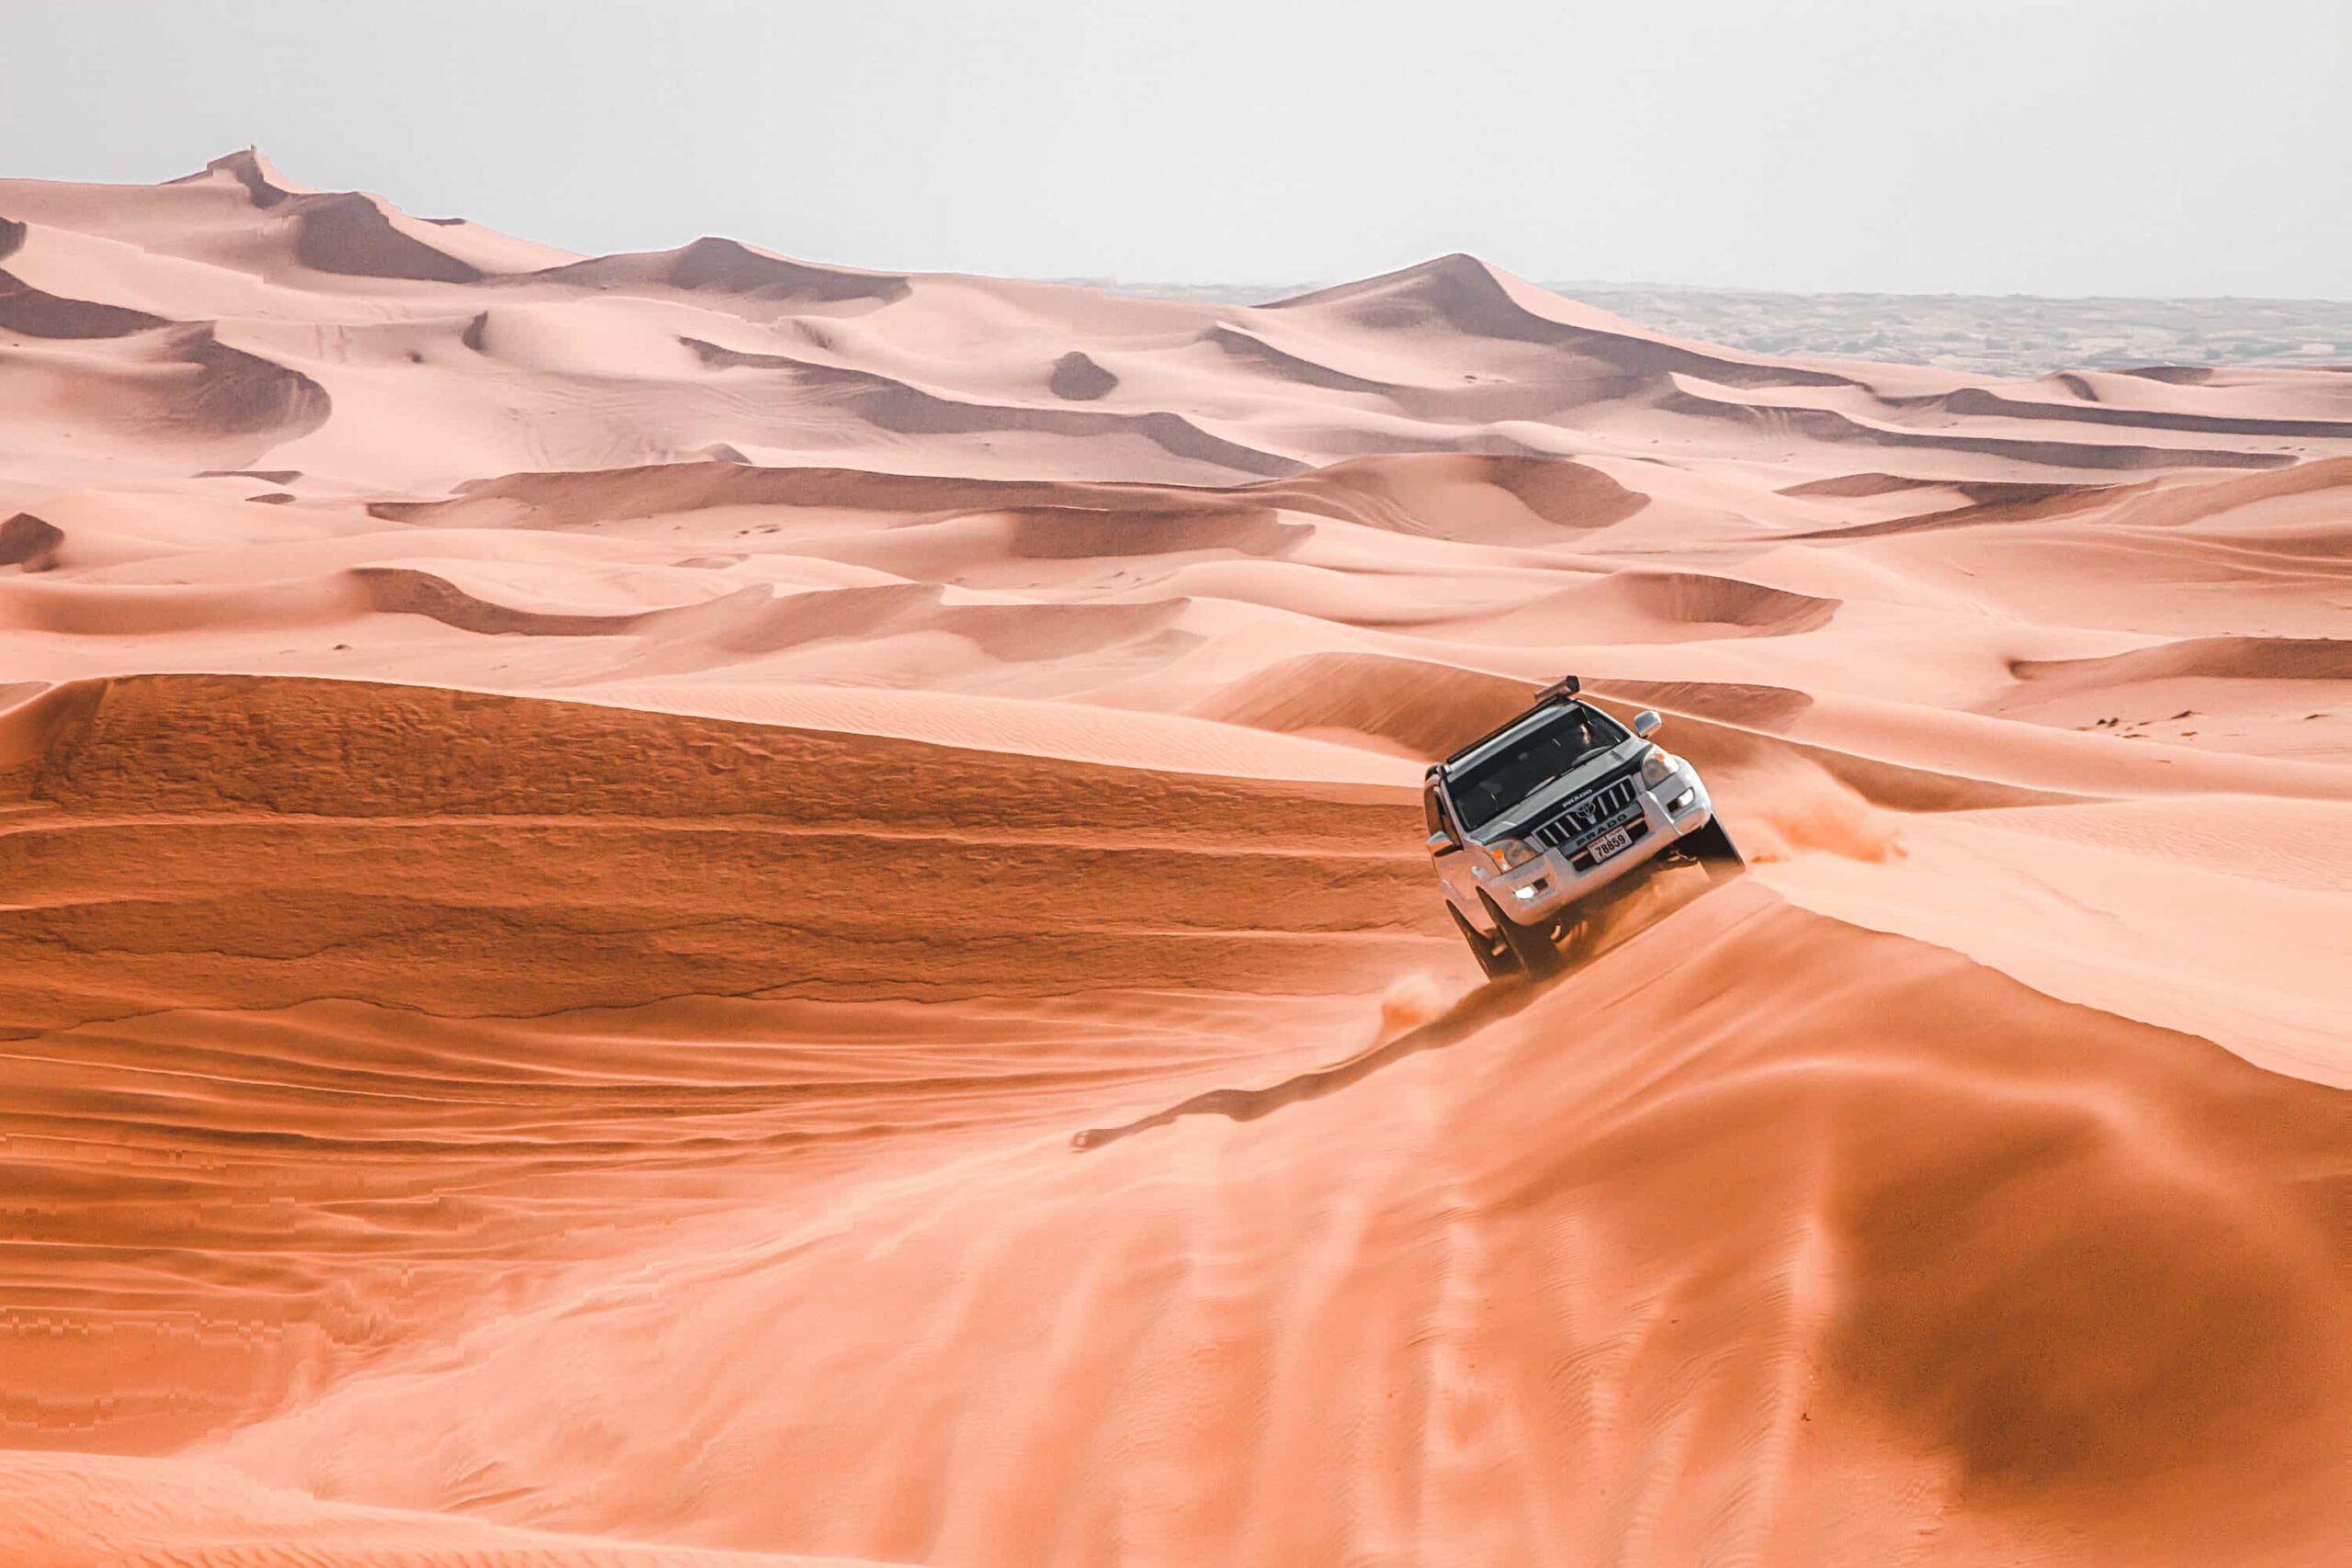 All You Need To Know about Desert Safari Adventure in Dubai